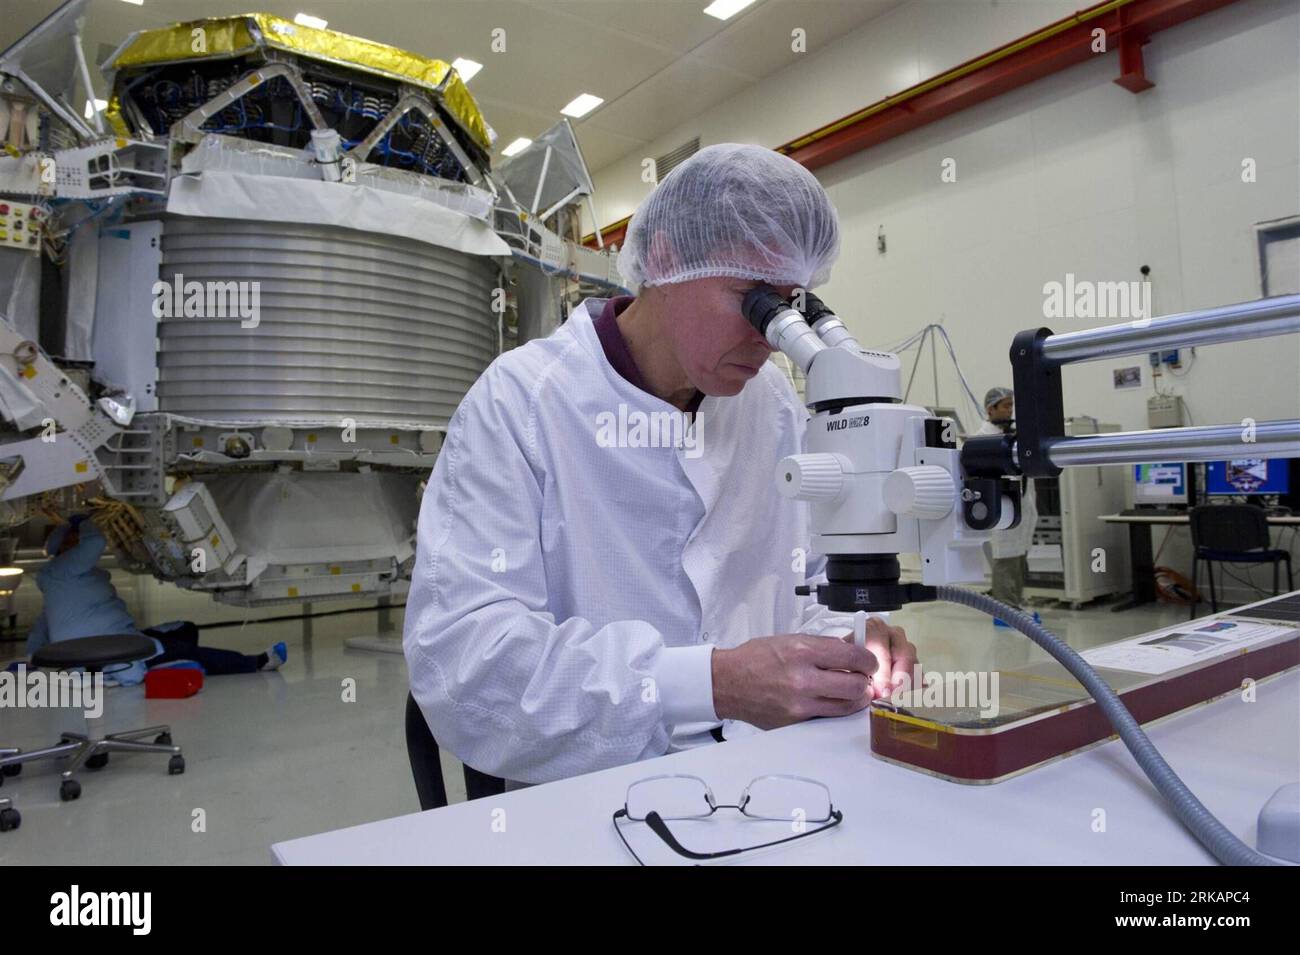 Bildnummer: 54413076  Datum: 20.07.2010  Copyright: imago/Xinhua (100908) -- GENEVA, Sept. 8, 2010 (Xinhua) -- Photo taken on July 20, 2010 shows scientist examines Alpha Magnetics Spectrometer (AMS), a particle detector designed and built to operate as an external payload on the International Space Station (ISS) to collect evidence of antimatter, dark matter and other hard-to-find elements of the universe over the next 20 years, at the European Organisation for Nuclear Research s (CERN) in Geneva, Switzerland. The 7.5-ton AMS device, assembled at the European Center for Nuclear Research to st Stock Photo